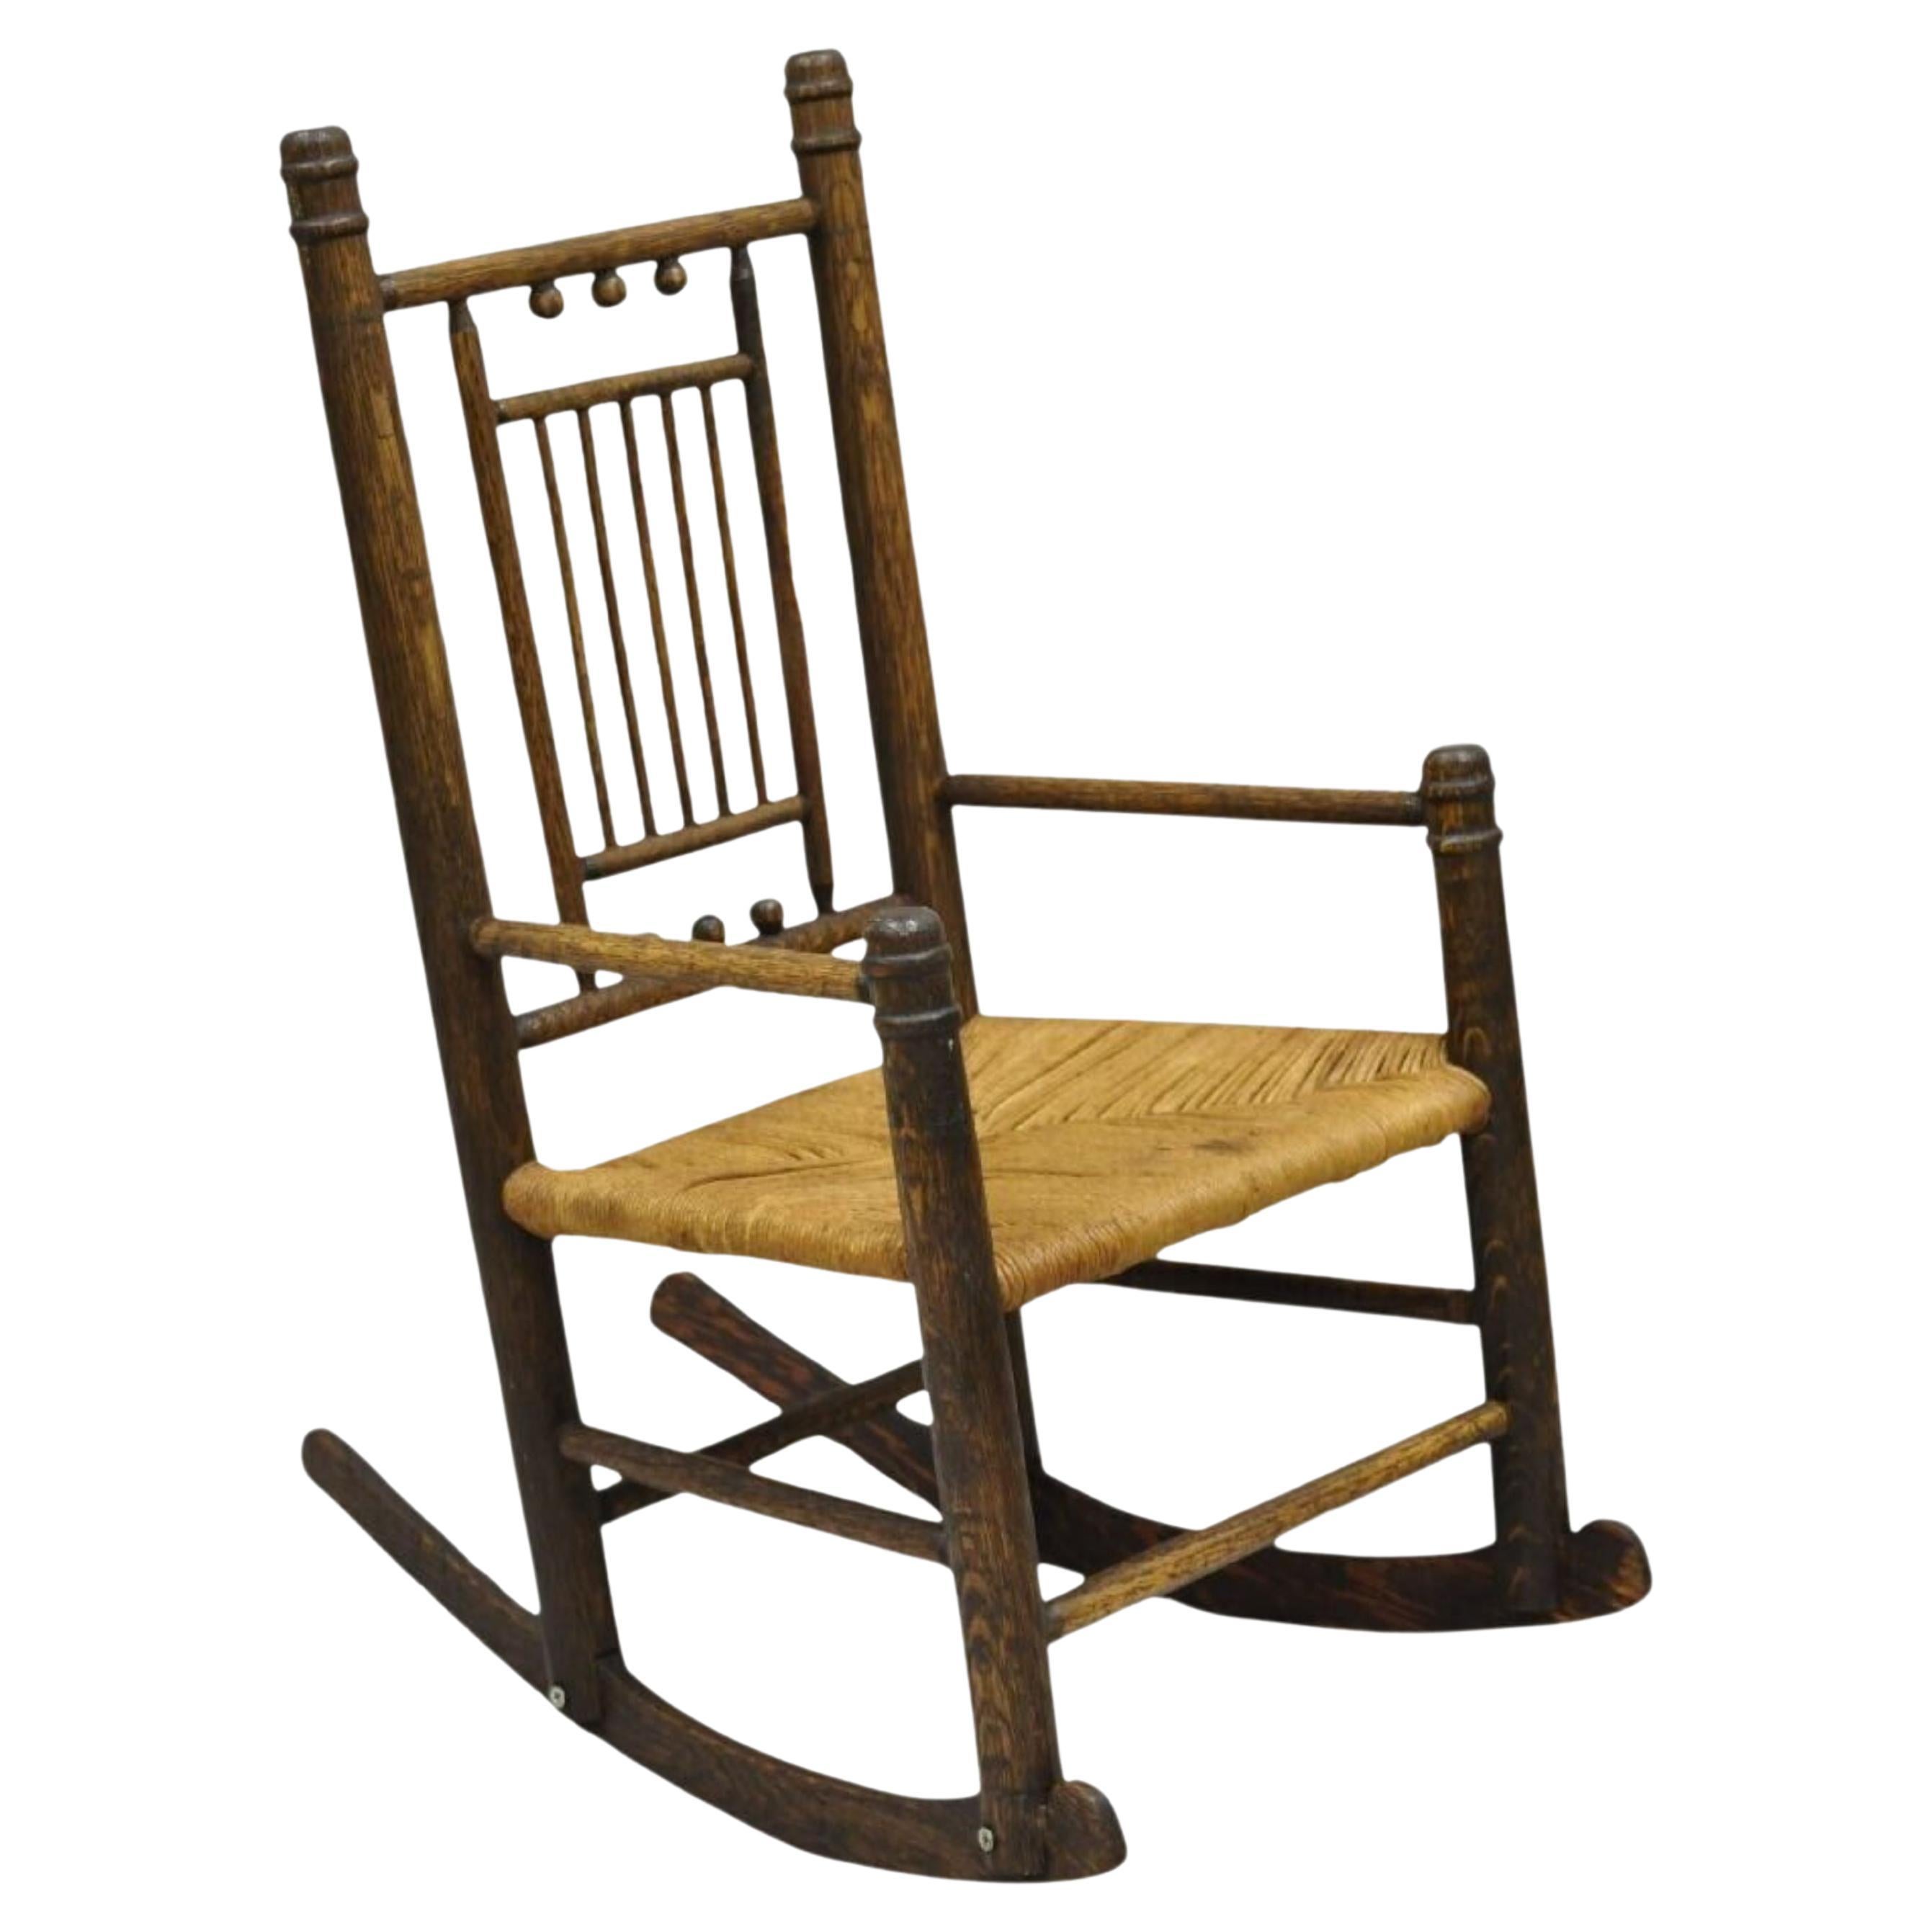 Antique Arts & Crafts Victorian Oak Wood Rush Seat Small Child's Rocking Chair For Sale